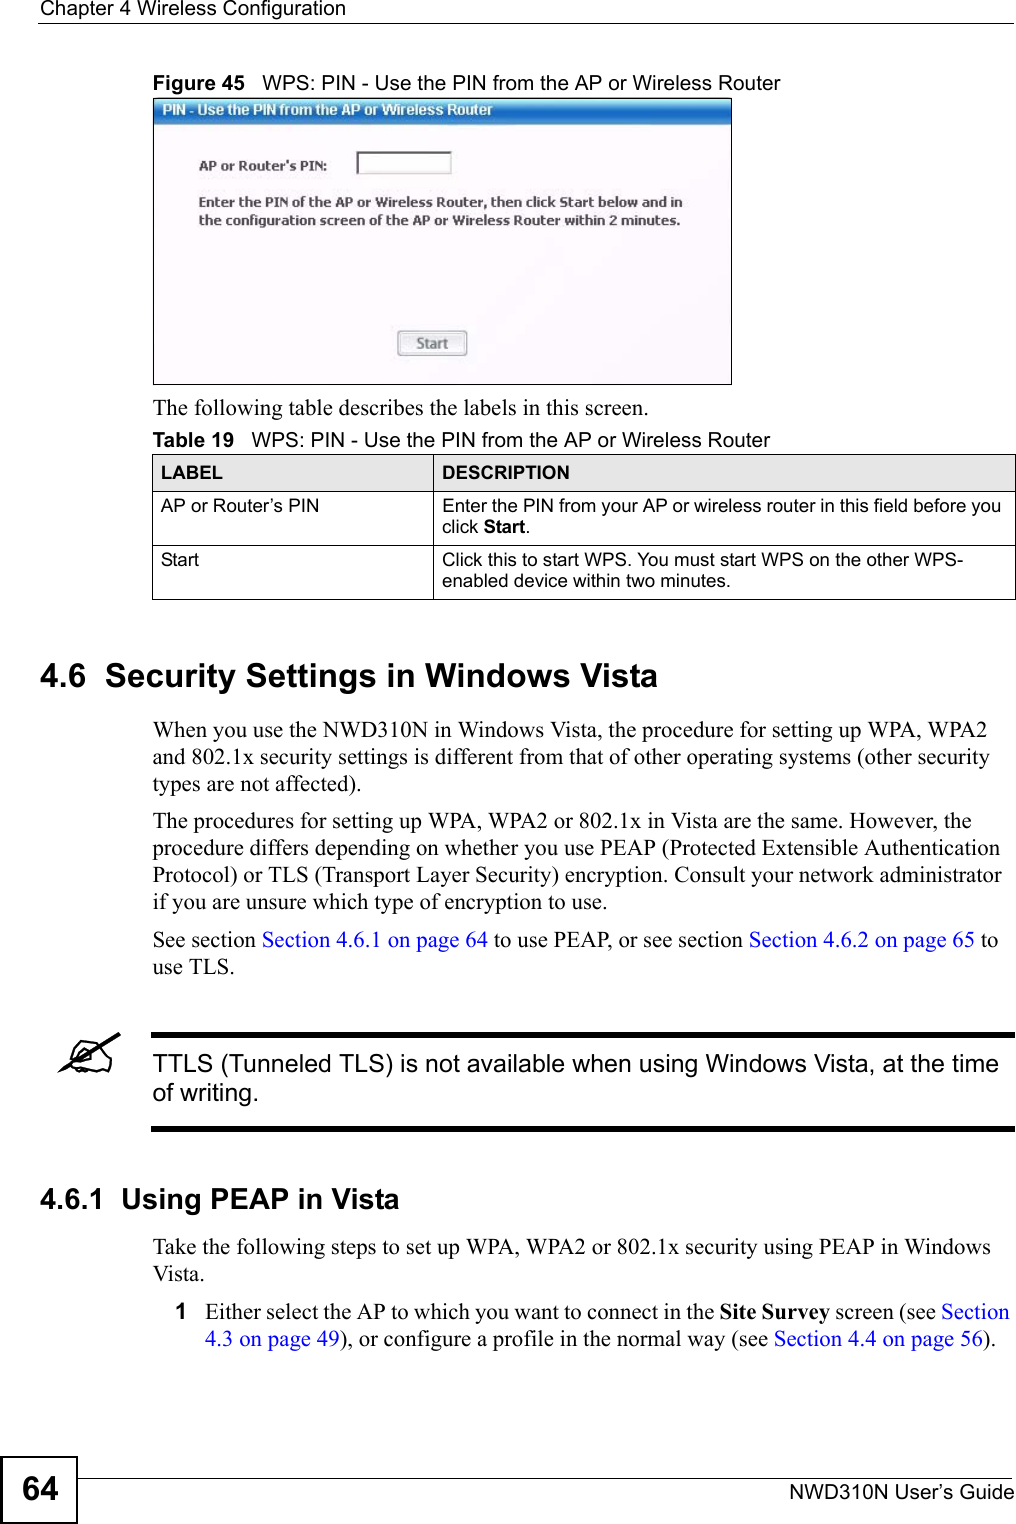 Chapter 4 Wireless ConfigurationNWD310N User’s Guide64Figure 45   WPS: PIN - Use the PIN from the AP or Wireless RouterThe following table describes the labels in this screen. 4.6  Security Settings in Windows Vista When you use the NWD310N in Windows Vista, the procedure for setting up WPA, WPA2 and 802.1x security settings is different from that of other operating systems (other security types are not affected).The procedures for setting up WPA, WPA2 or 802.1x in Vista are the same. However, the procedure differs depending on whether you use PEAP (Protected Extensible Authentication Protocol) or TLS (Transport Layer Security) encryption. Consult your network administrator if you are unsure which type of encryption to use. See section Section 4.6.1 on page 64 to use PEAP, or see section Section 4.6.2 on page 65 to use TLS.&quot;TTLS (Tunneled TLS) is not available when using Windows Vista, at the time of writing.4.6.1  Using PEAP in VistaTake the following steps to set up WPA, WPA2 or 802.1x security using PEAP in Windows Vista.1Either select the AP to which you want to connect in the Site Survey screen (see Section 4.3 on page 49), or configure a profile in the normal way (see Section 4.4 on page 56).Table 19   WPS: PIN - Use the PIN from the AP or Wireless RouterLABEL DESCRIPTIONAP or Router’s PIN Enter the PIN from your AP or wireless router in this field before you click Start.Start Click this to start WPS. You must start WPS on the other WPS-enabled device within two minutes.